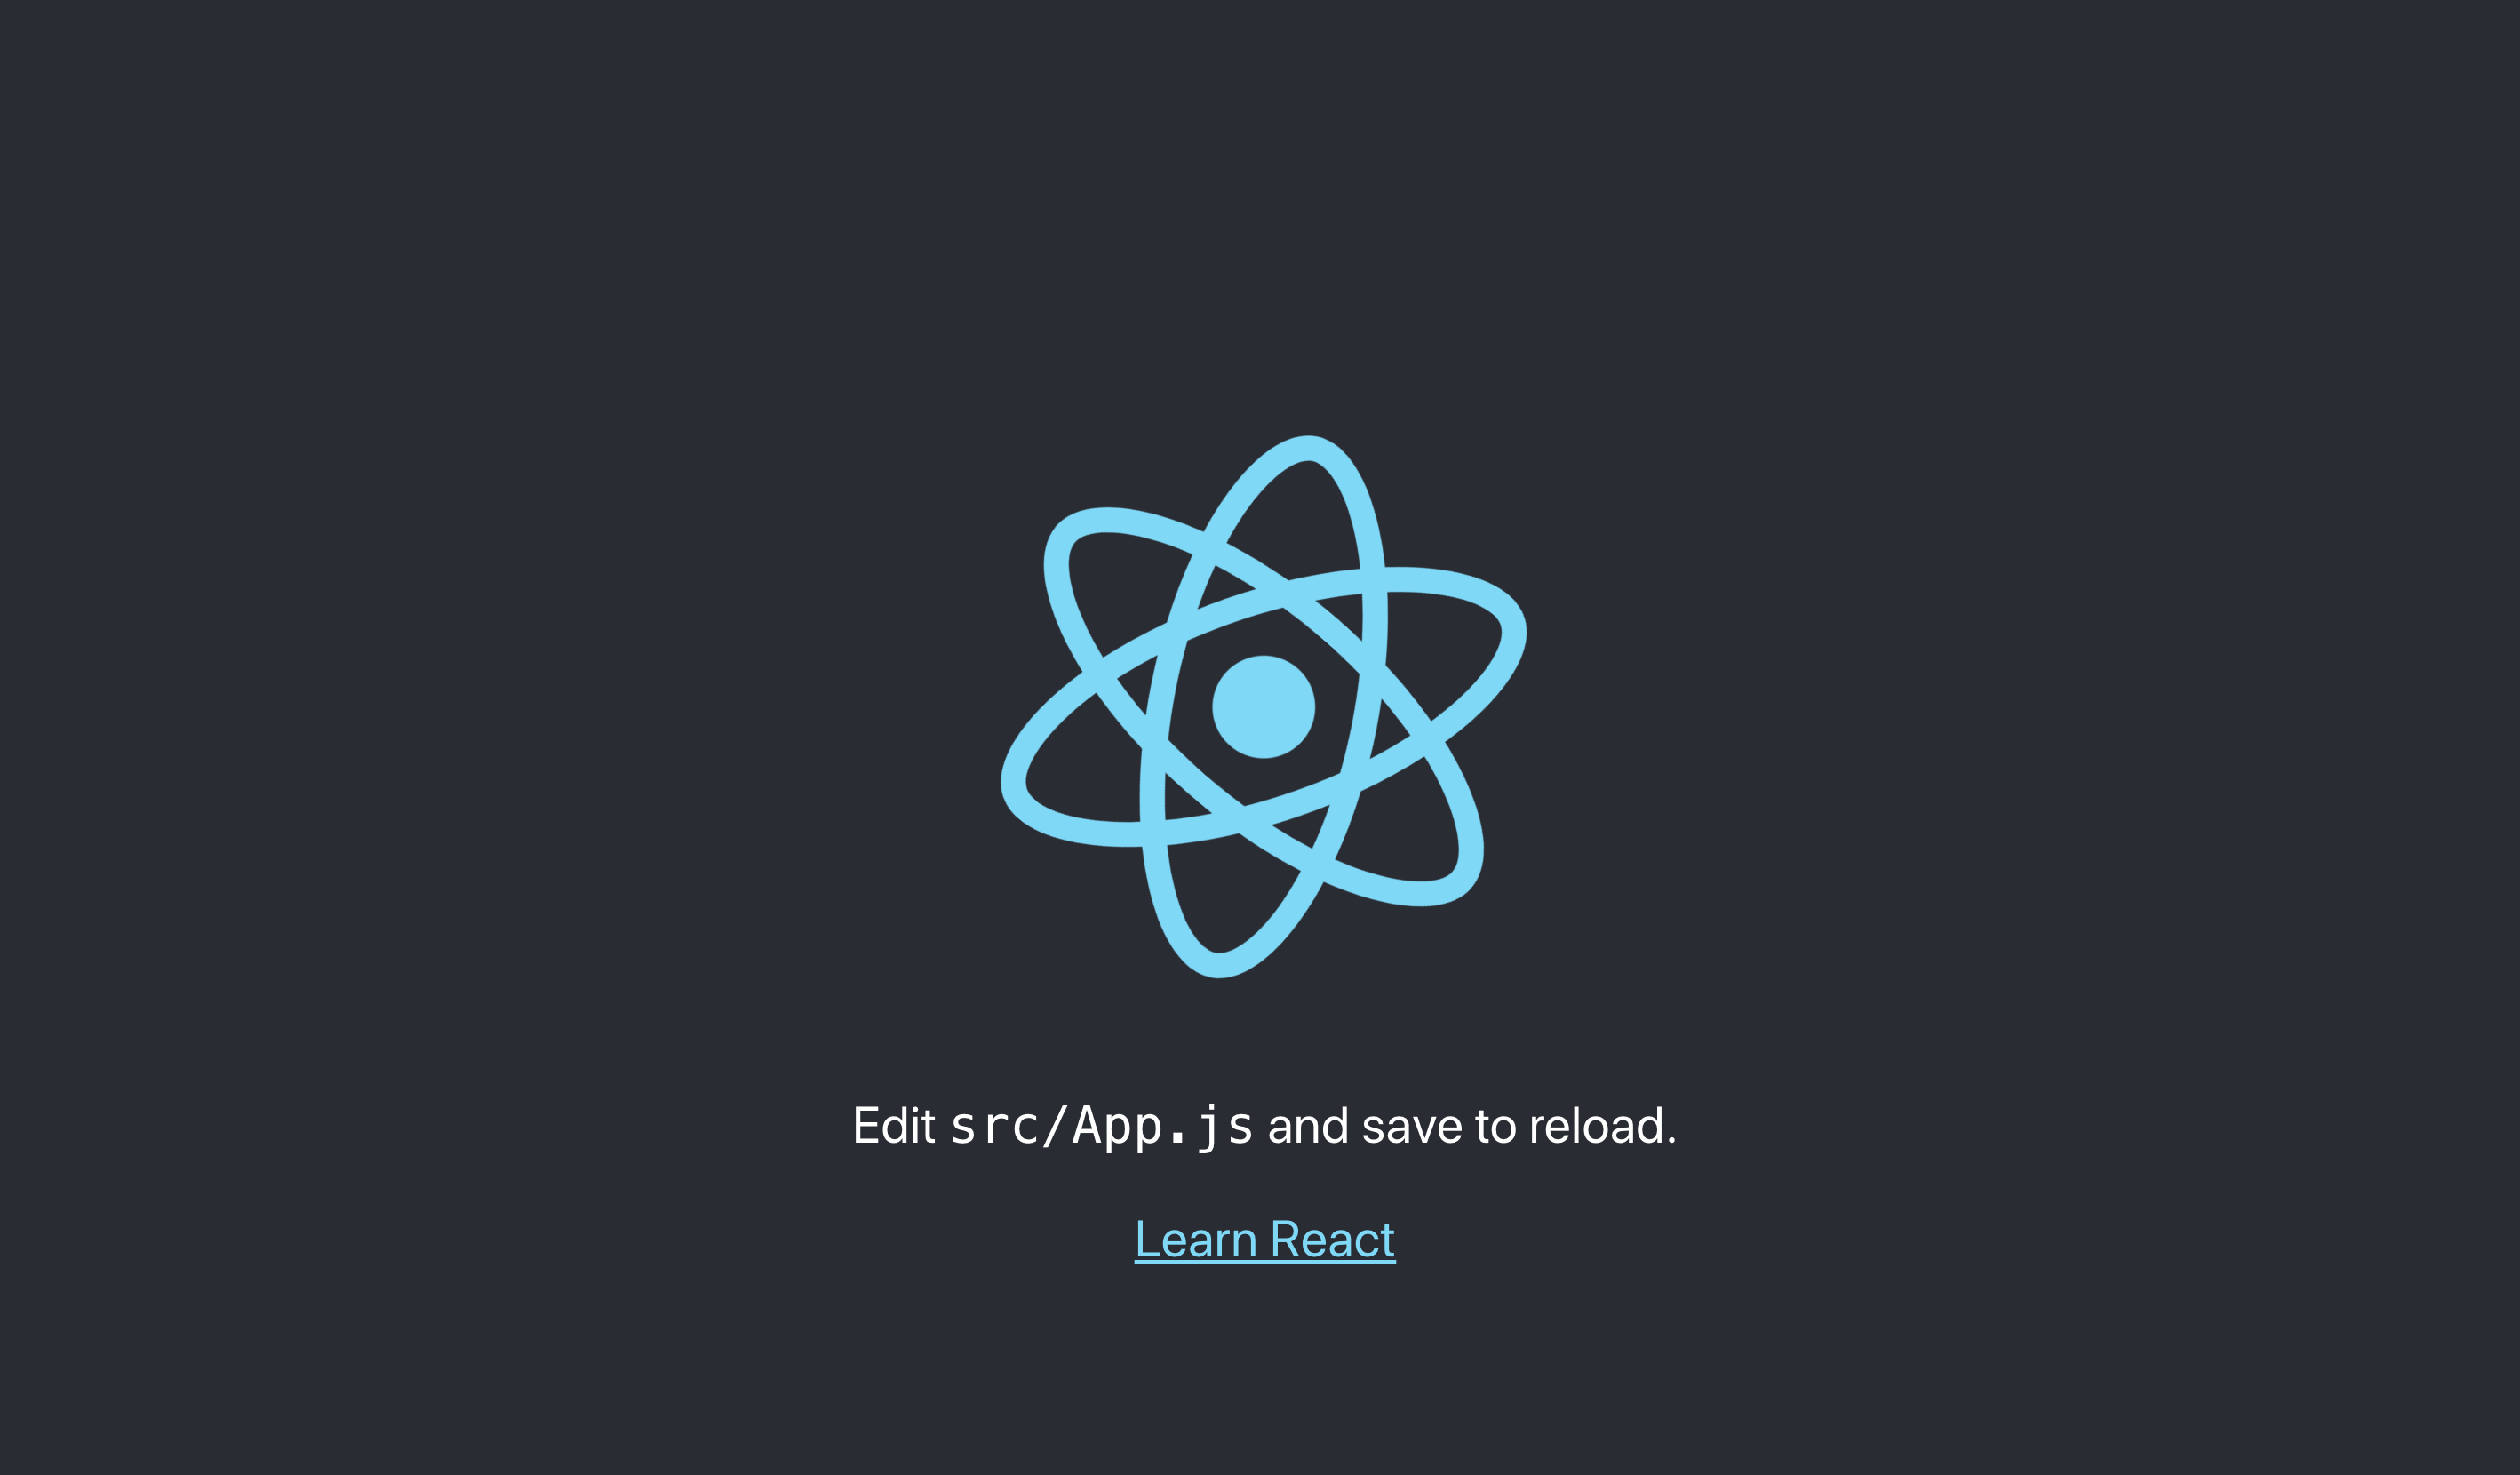 View your example React app in a browser.